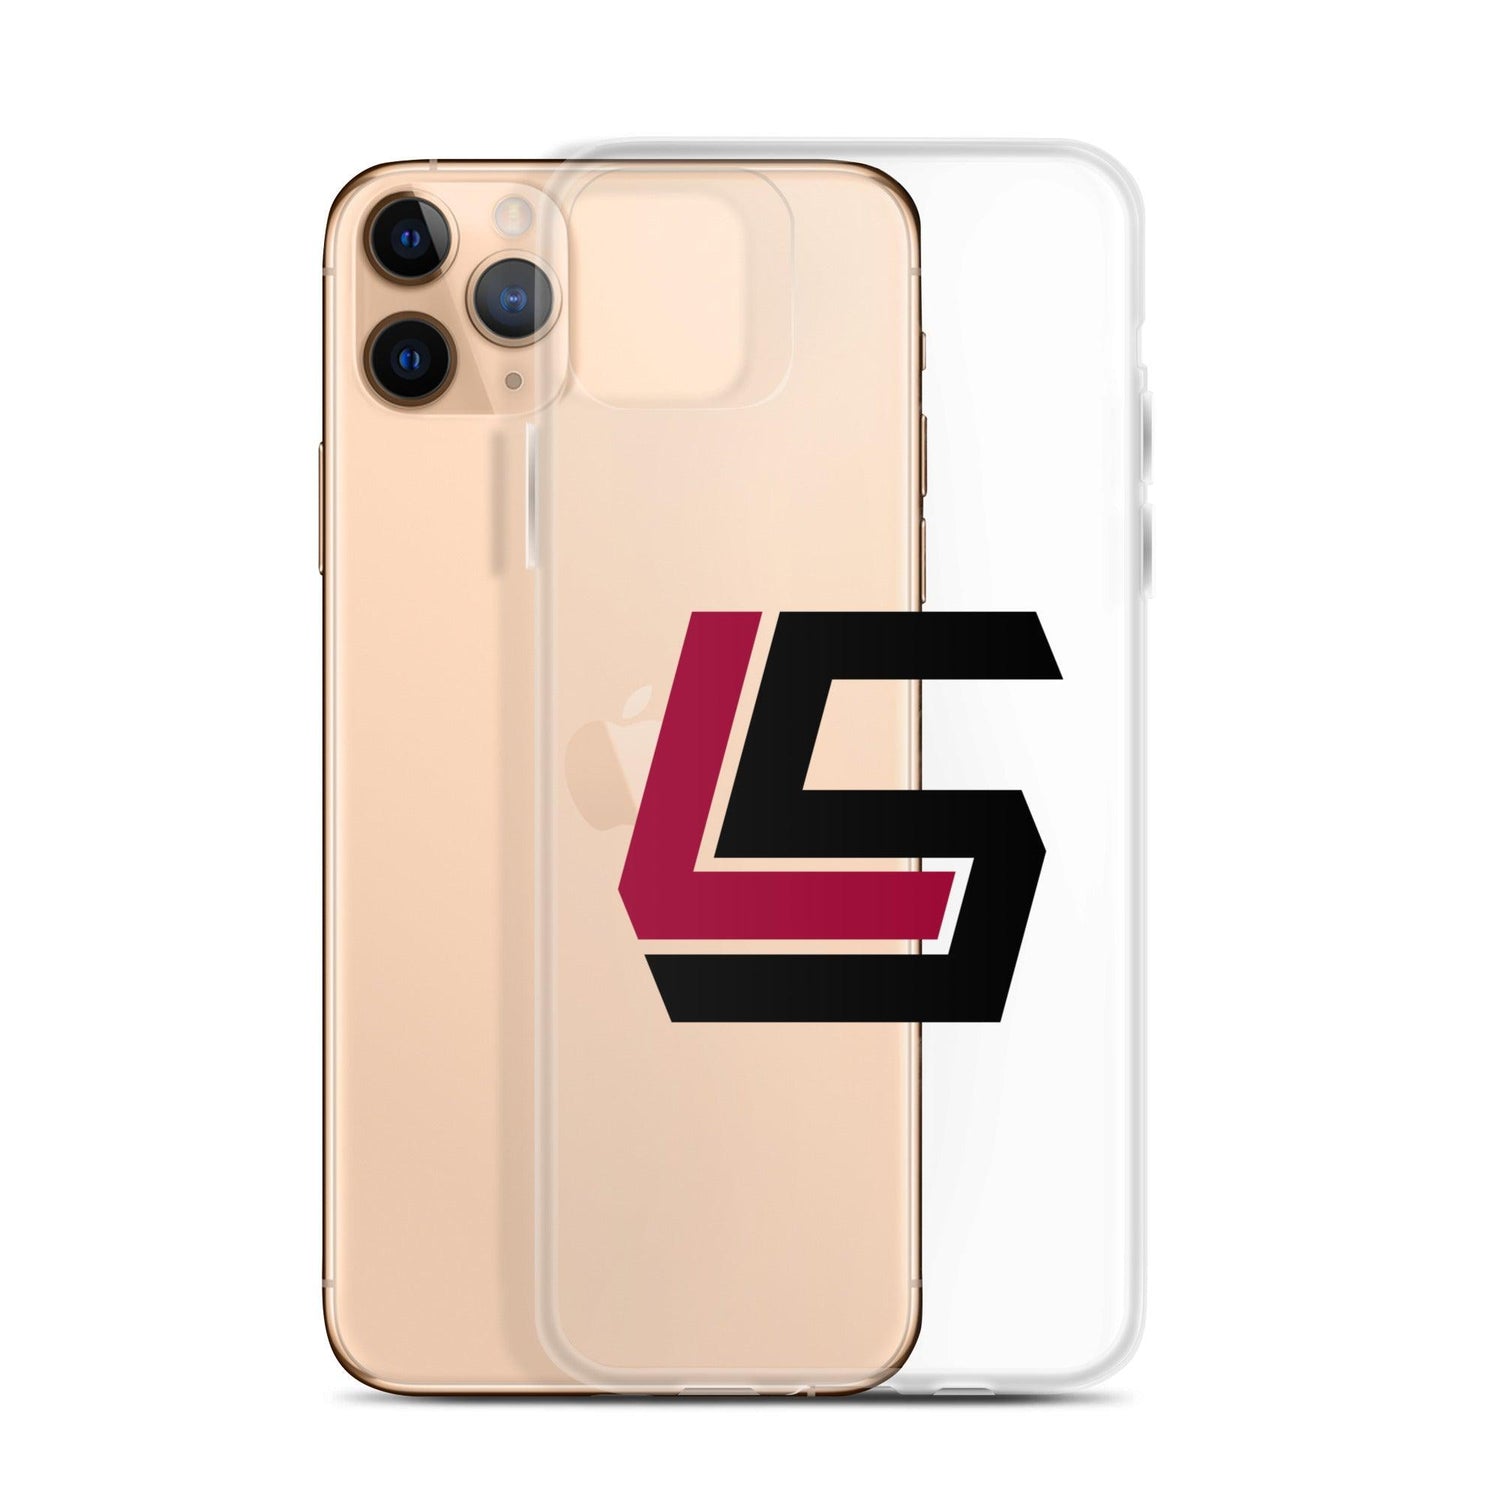 Lanorris Sellers "Essential" iPhone Case - Fan Arch